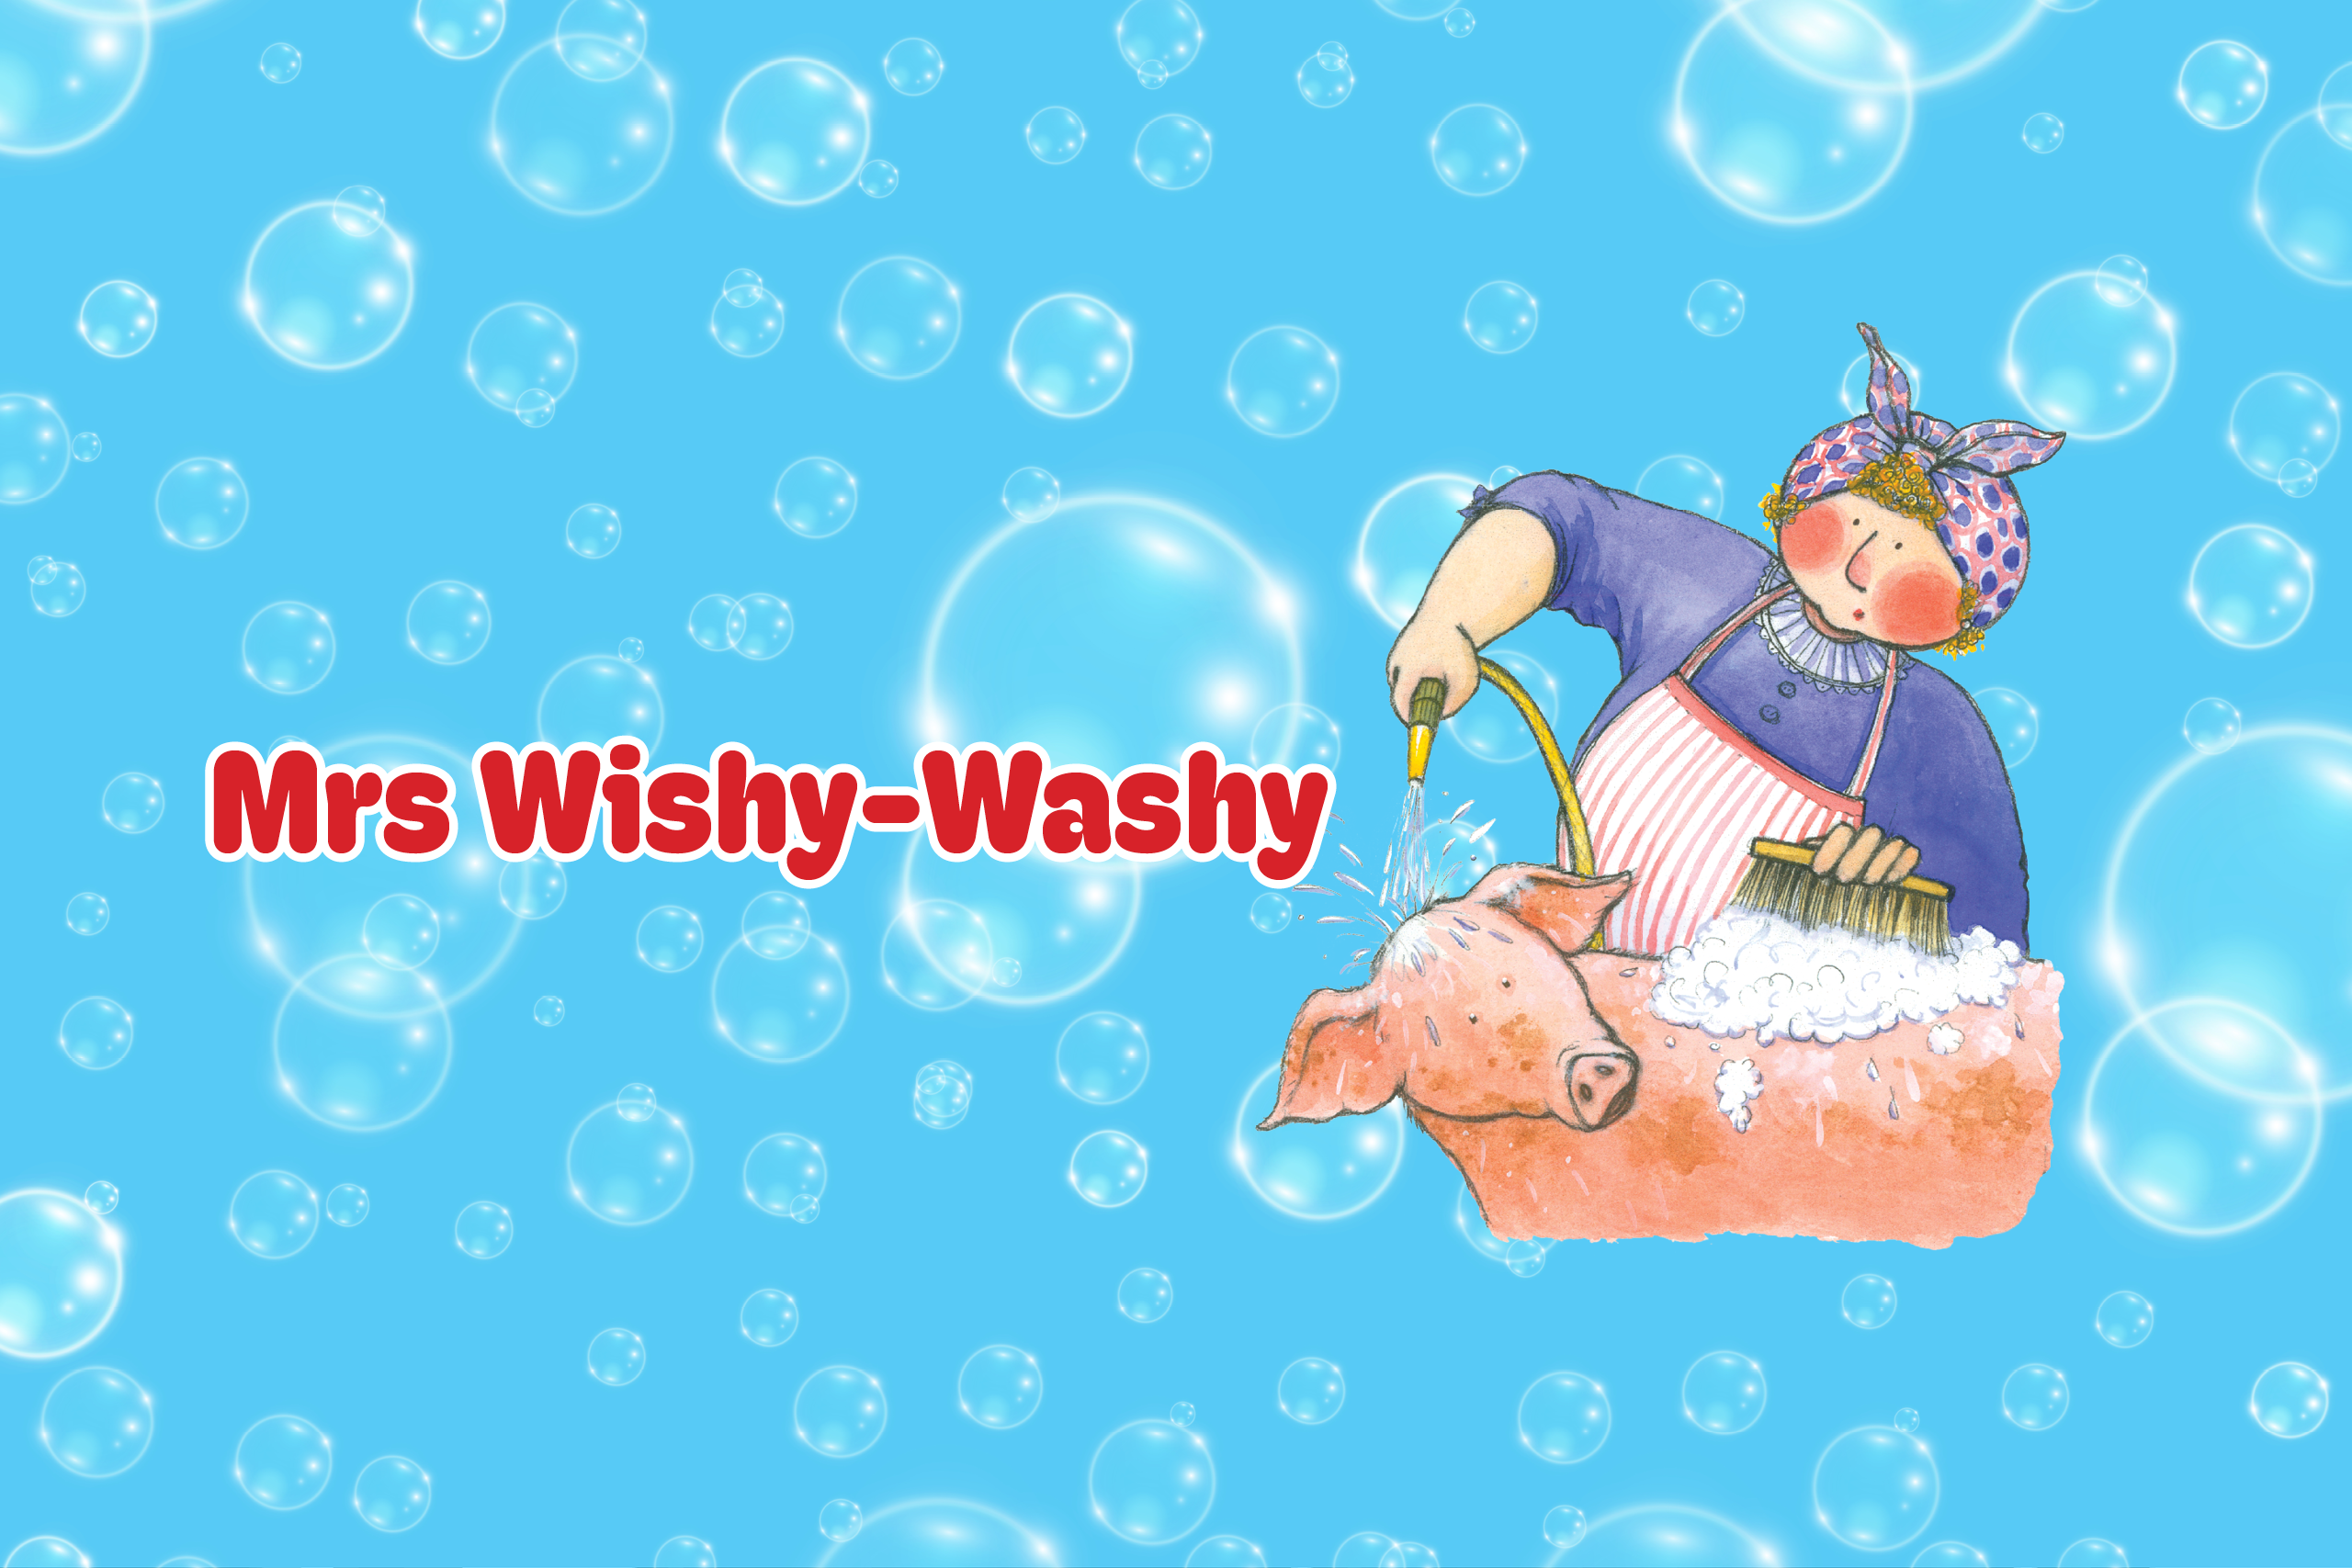 An illustration for the play Mrs Wishy Washy of a woman washing a pig.